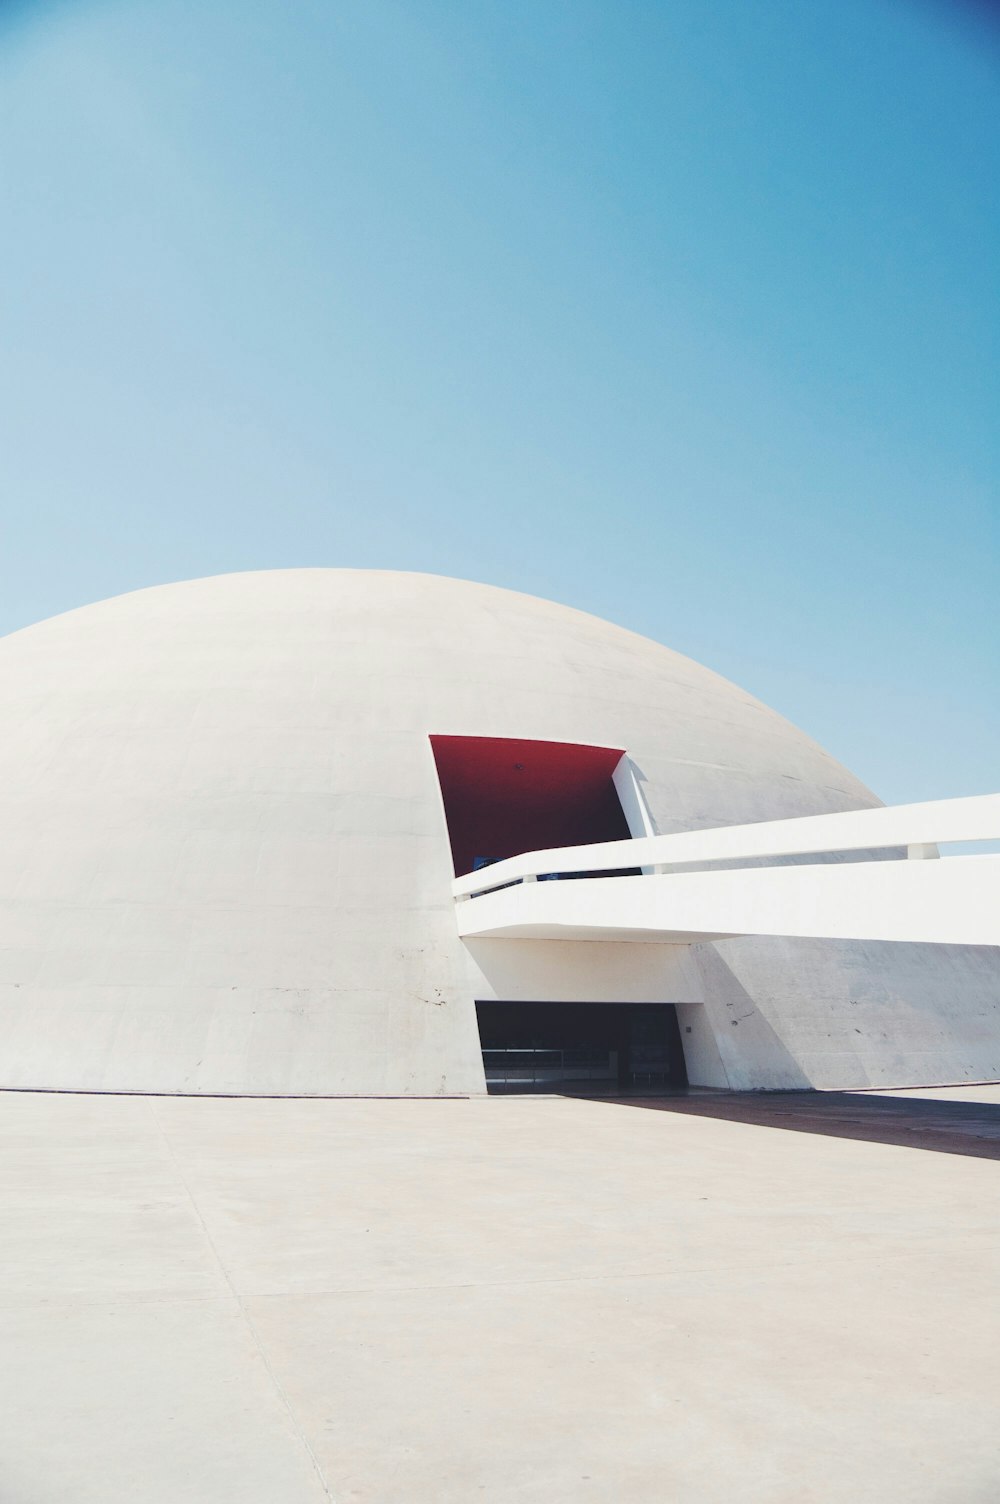 white dome concrete building under clear blue sky during daytime